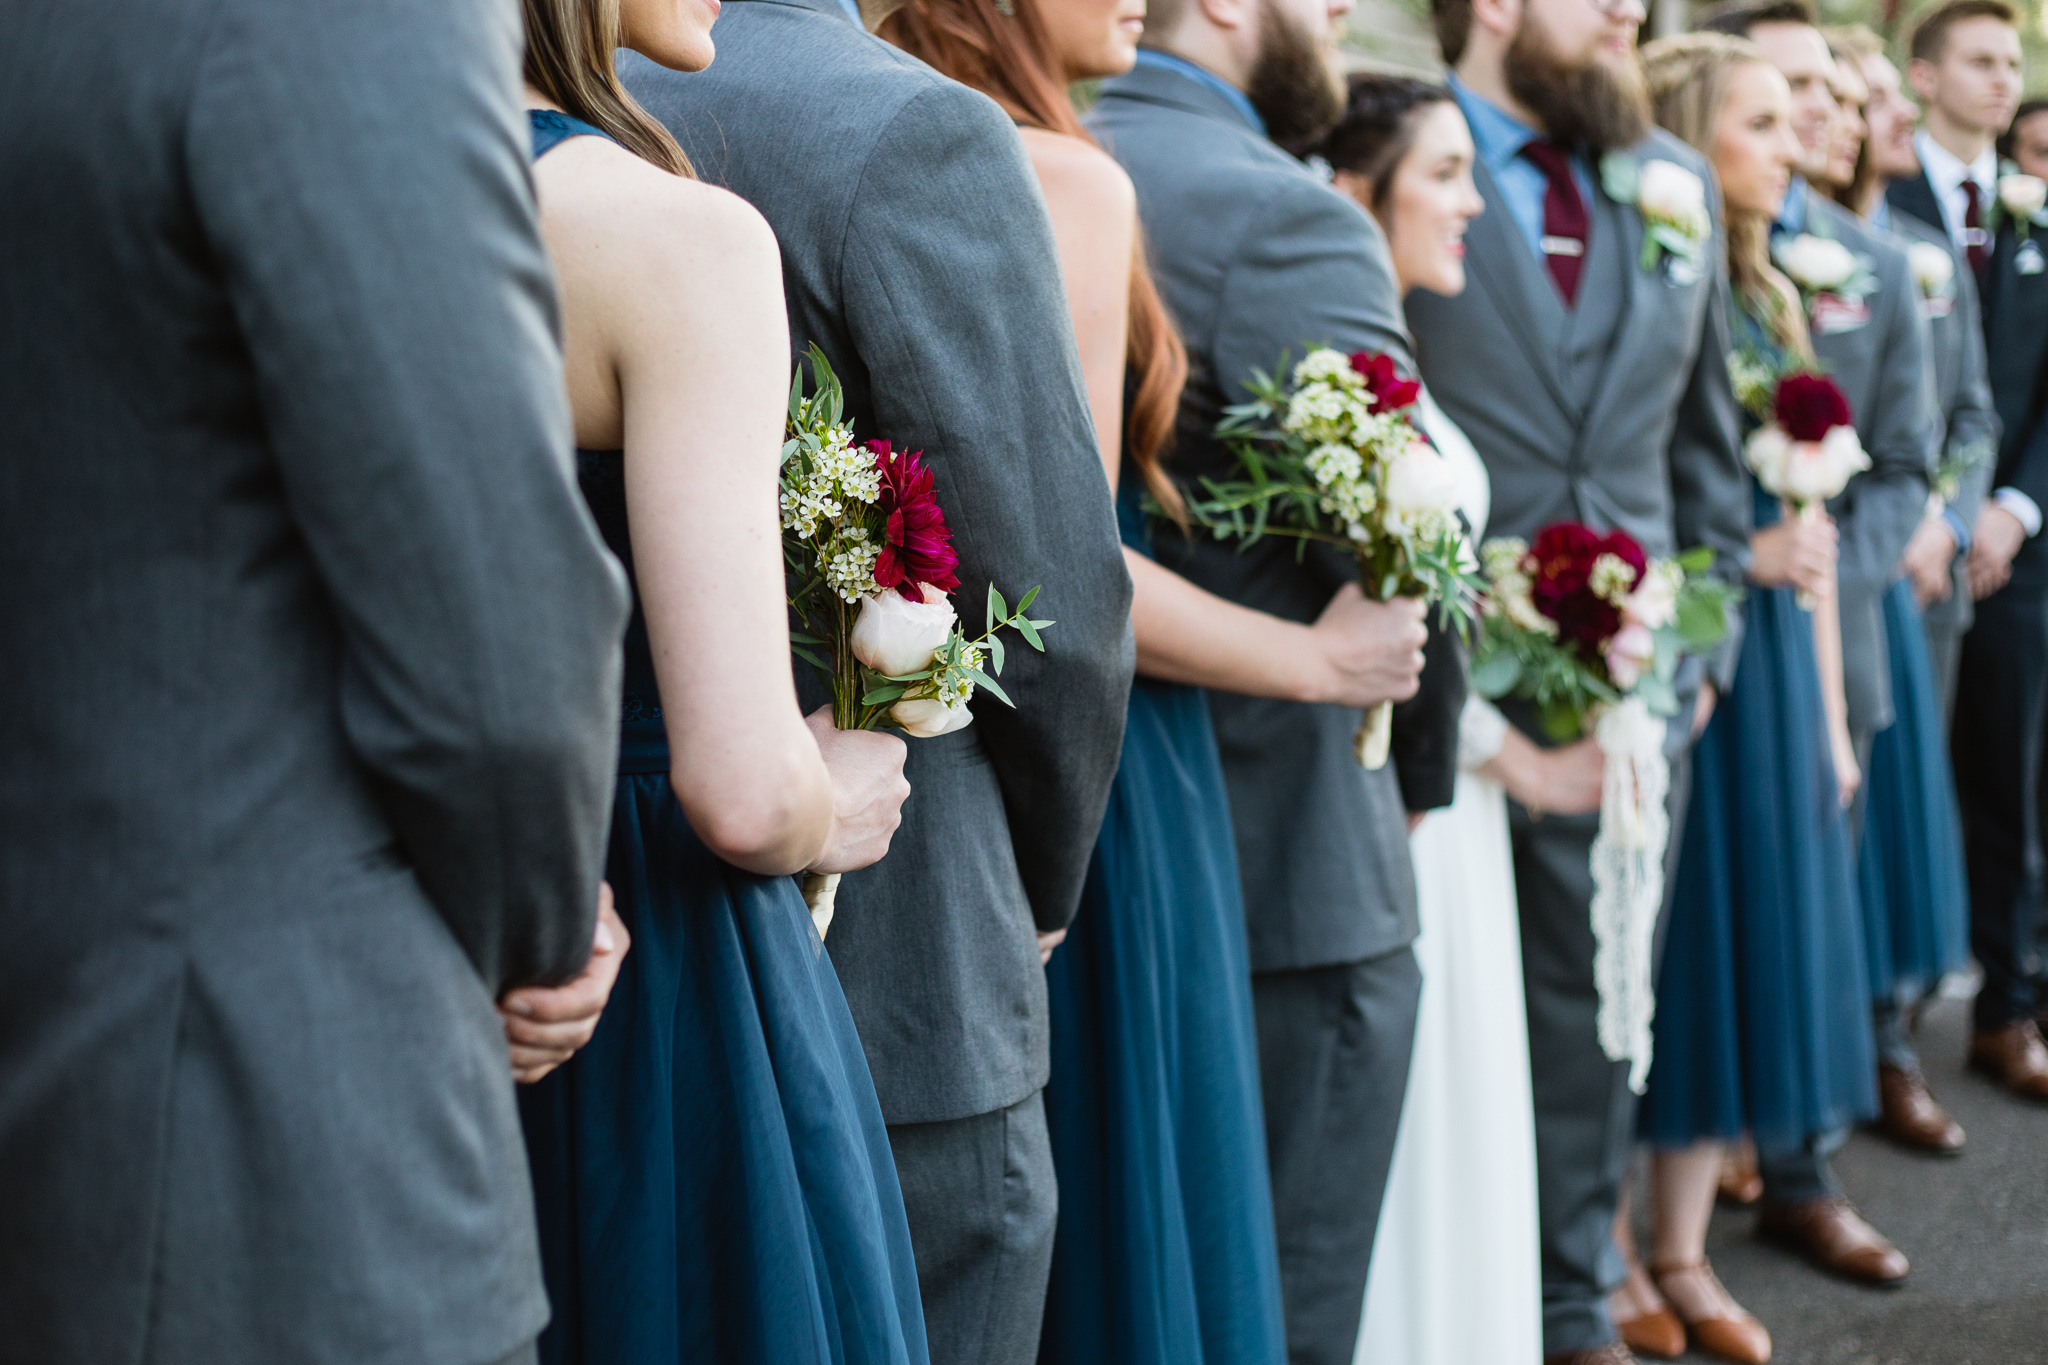 Navy, grey, and maroon bridal party details.